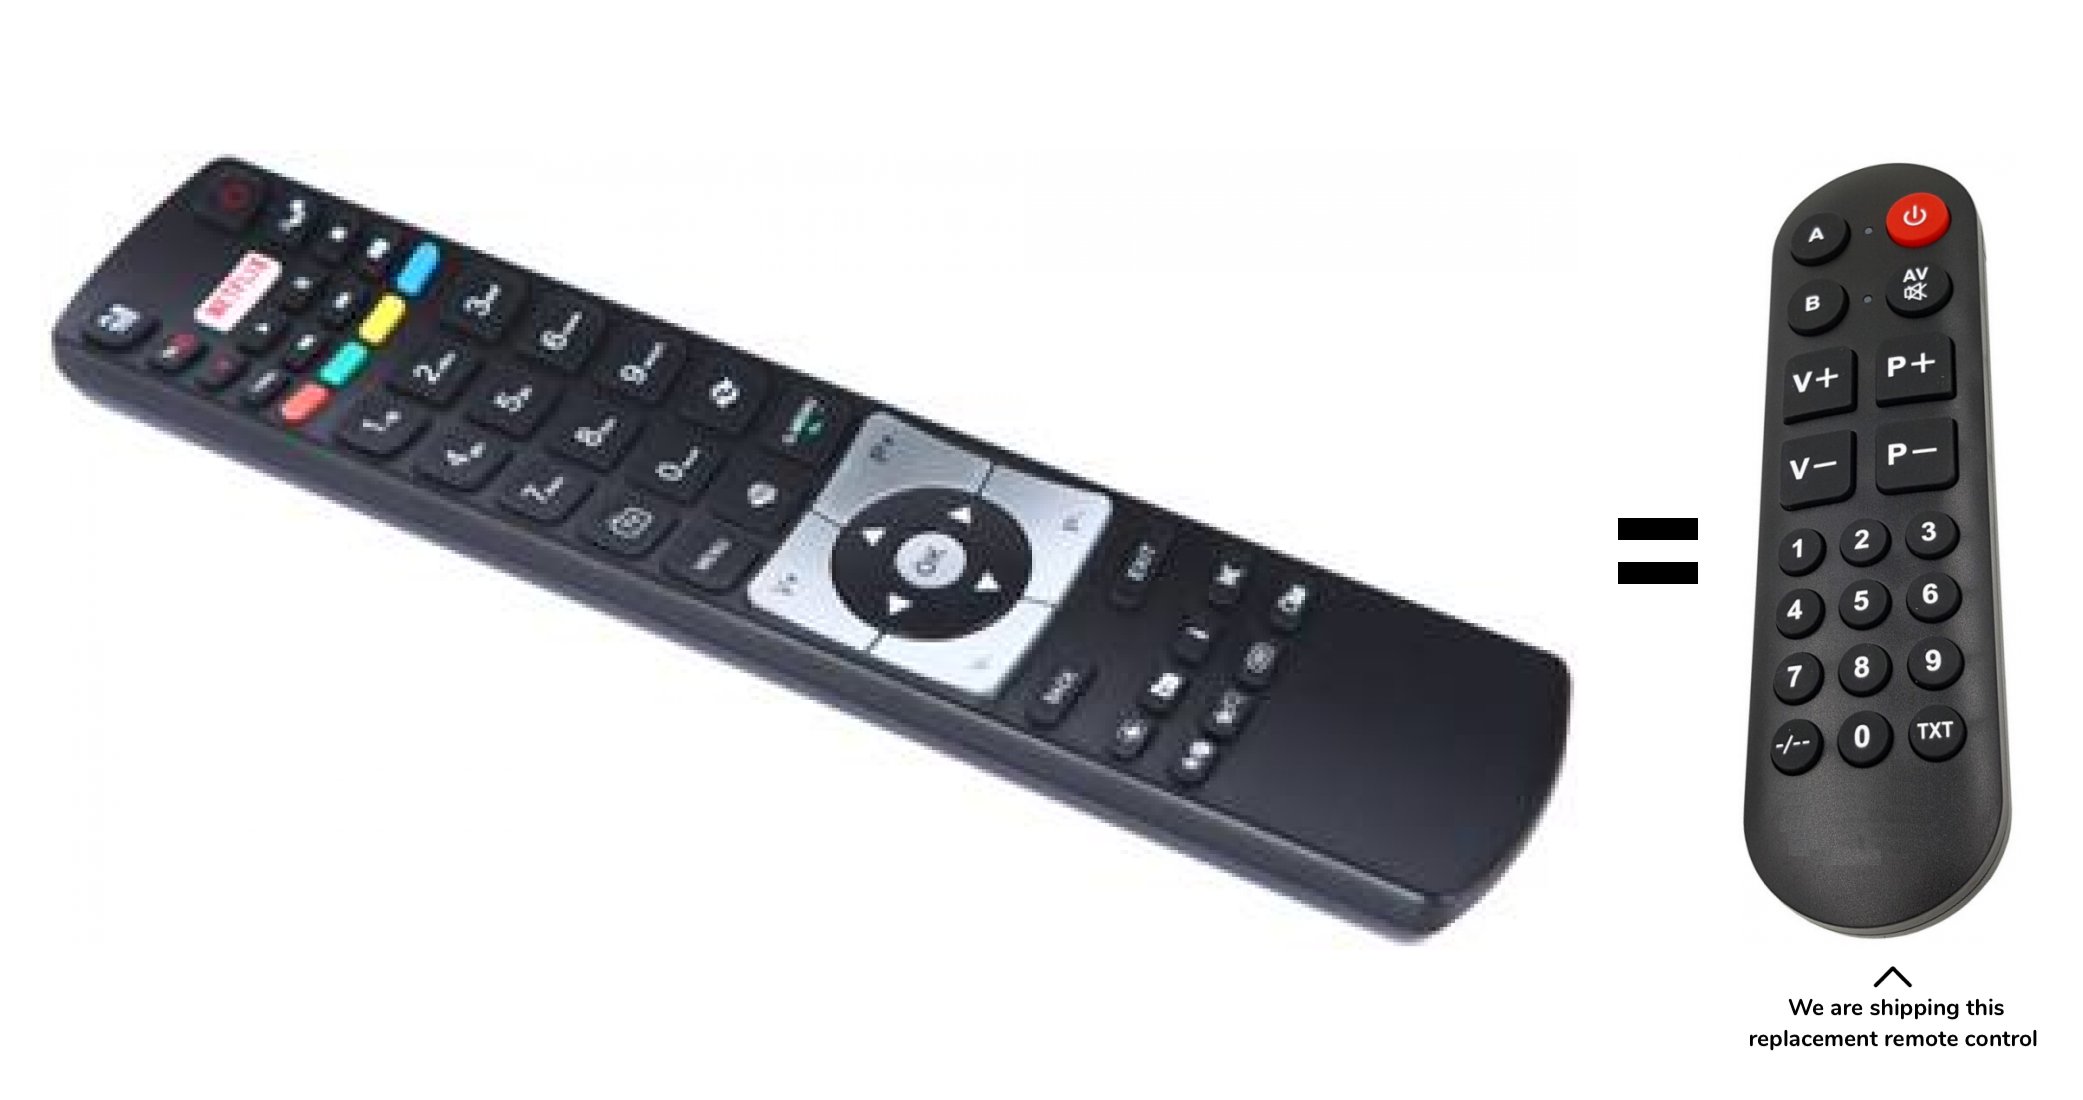 Finlux TVF24FHB5661 remote control for seniors